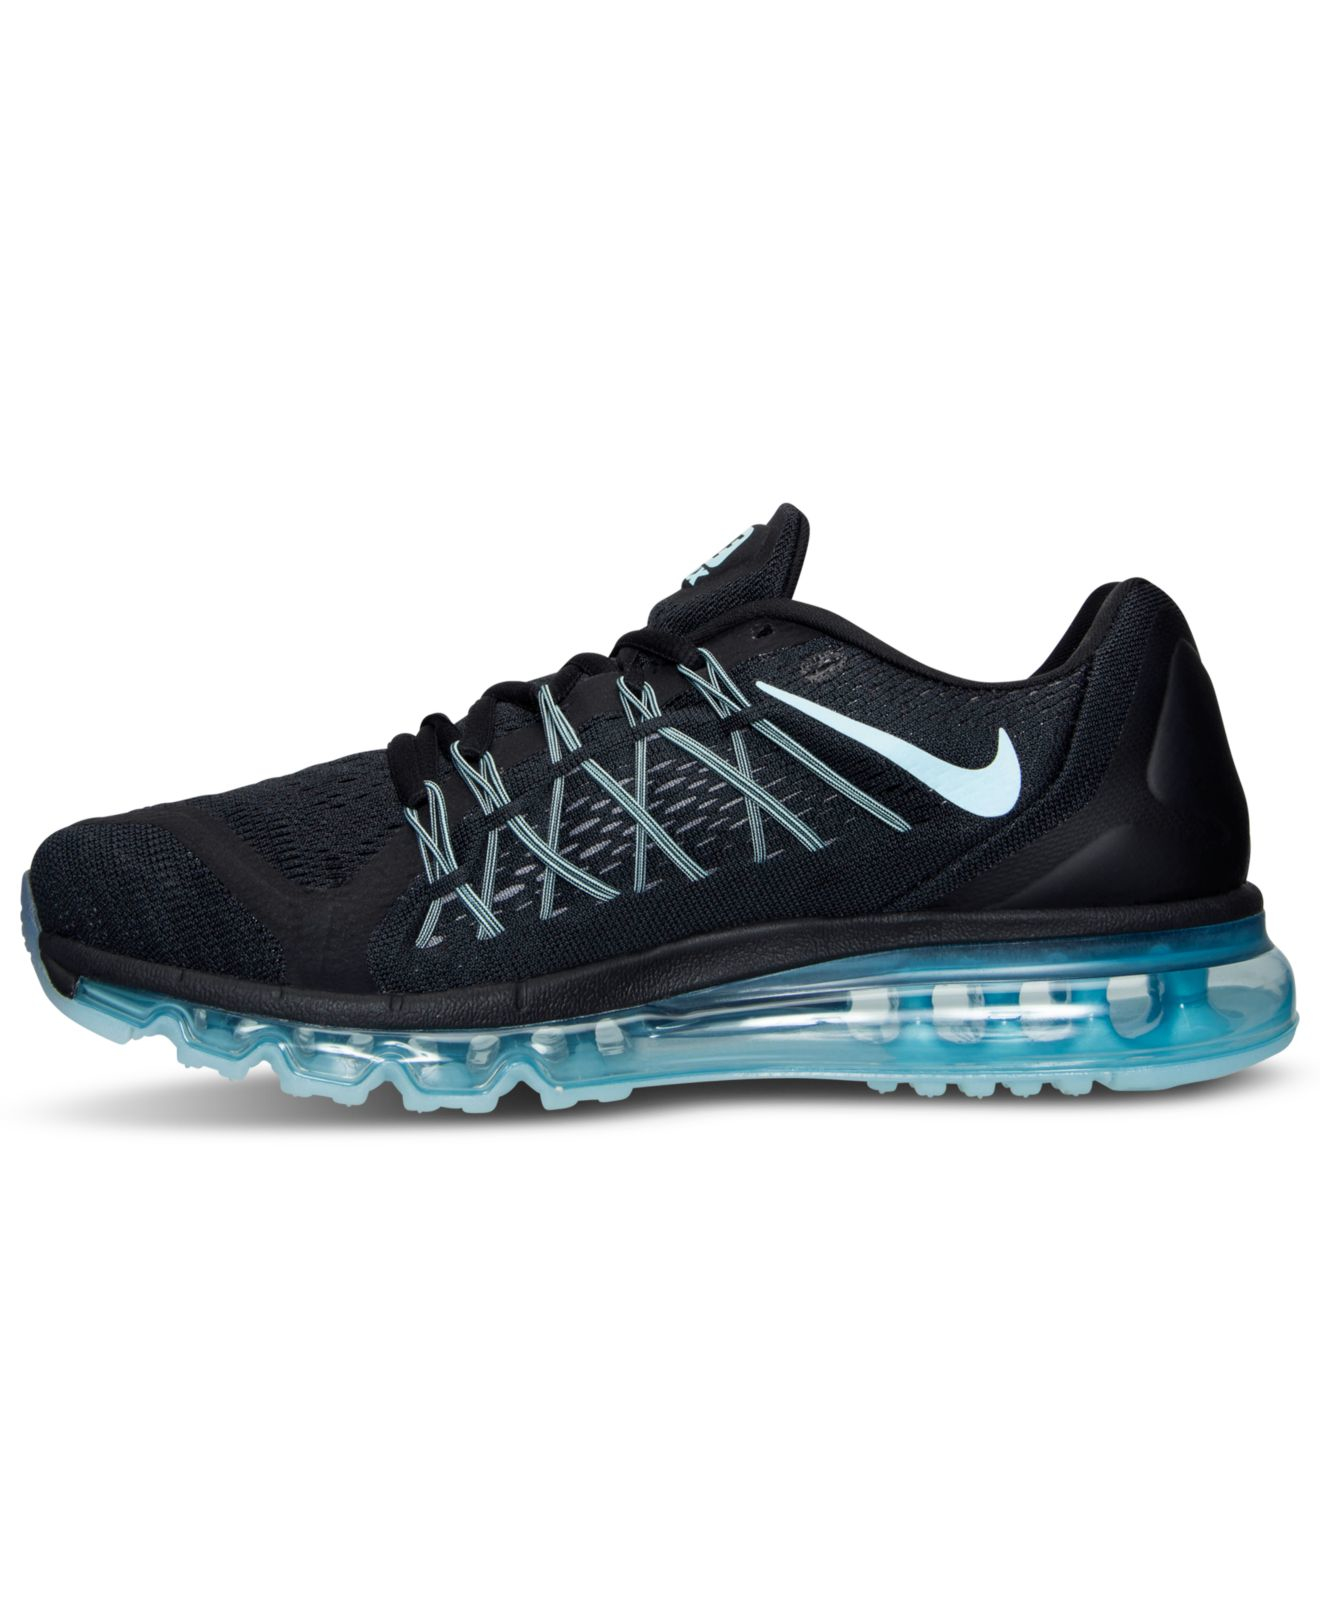 Lyst - Nike Women's Air Max 2015 Running Sneakers From Finish Line in Black